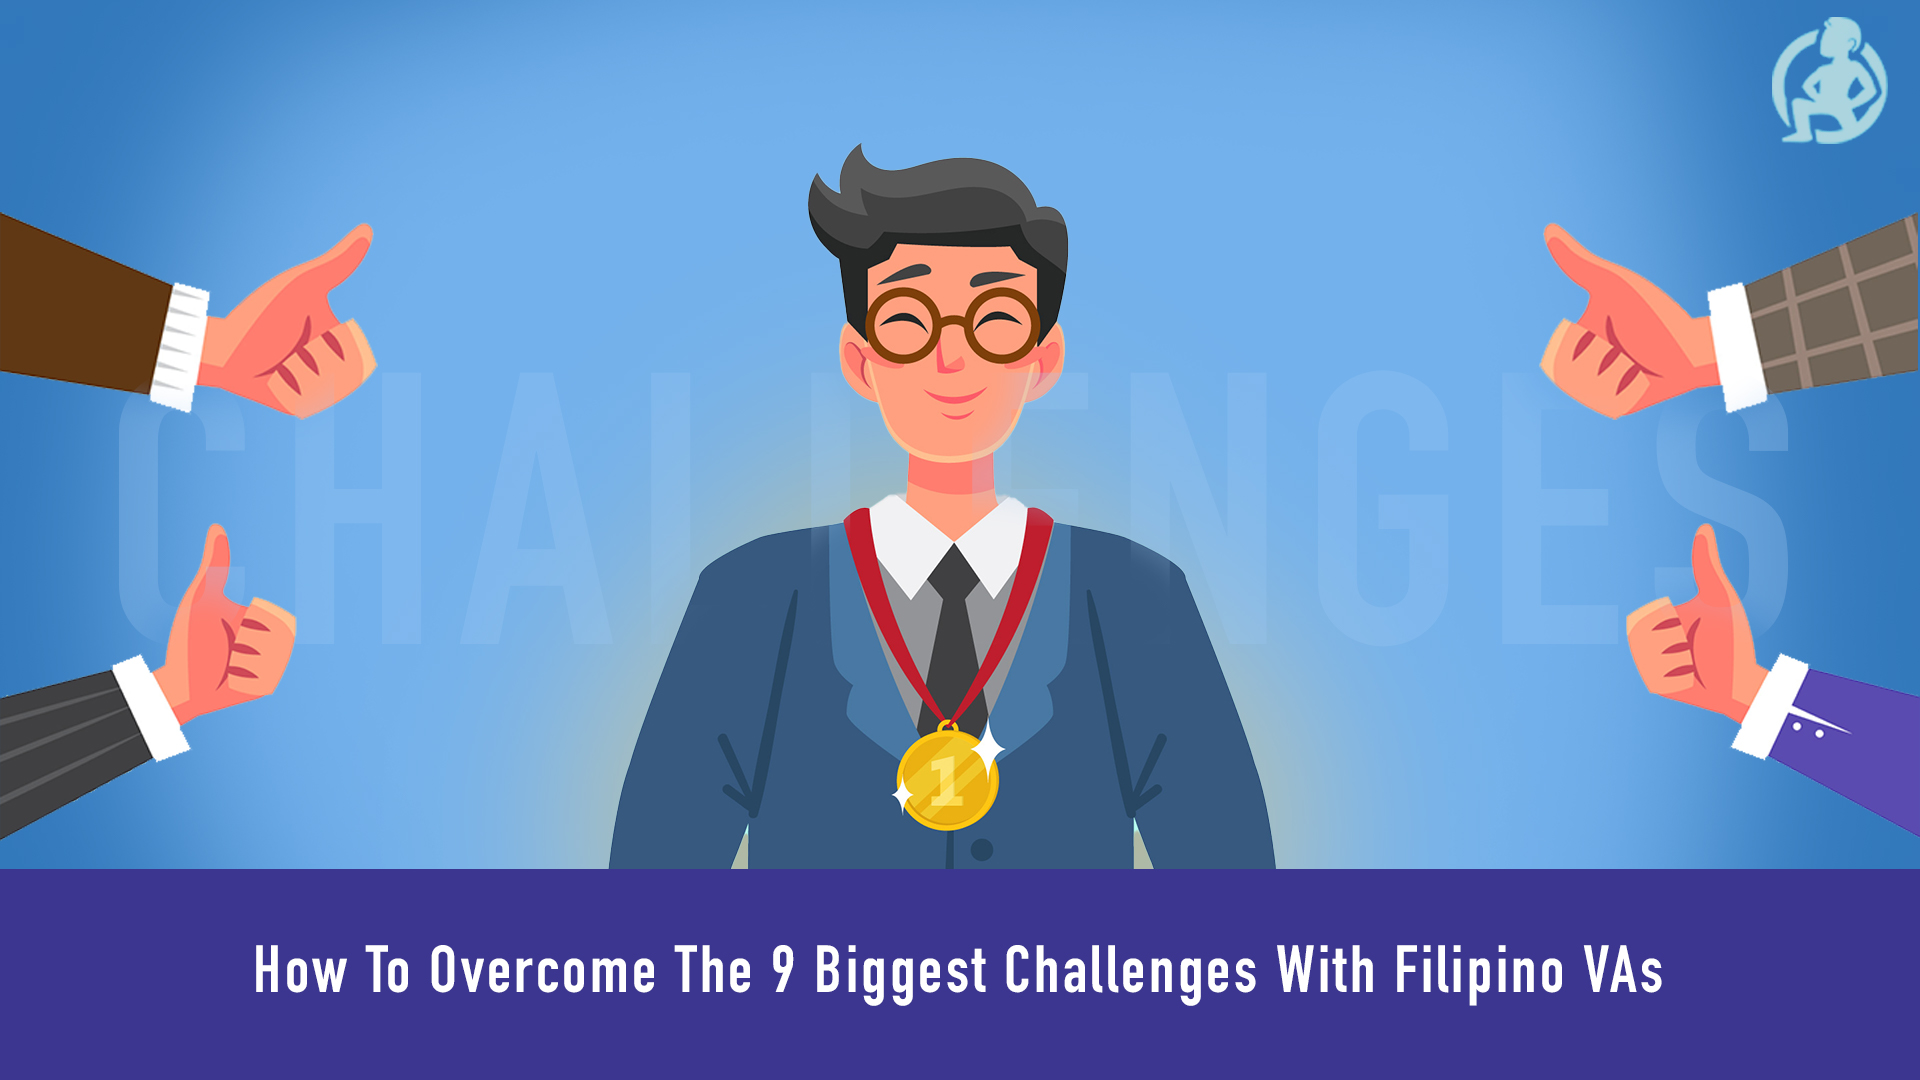 631 How To Overcome The 9 Biggest Challenges With Filipino VAs